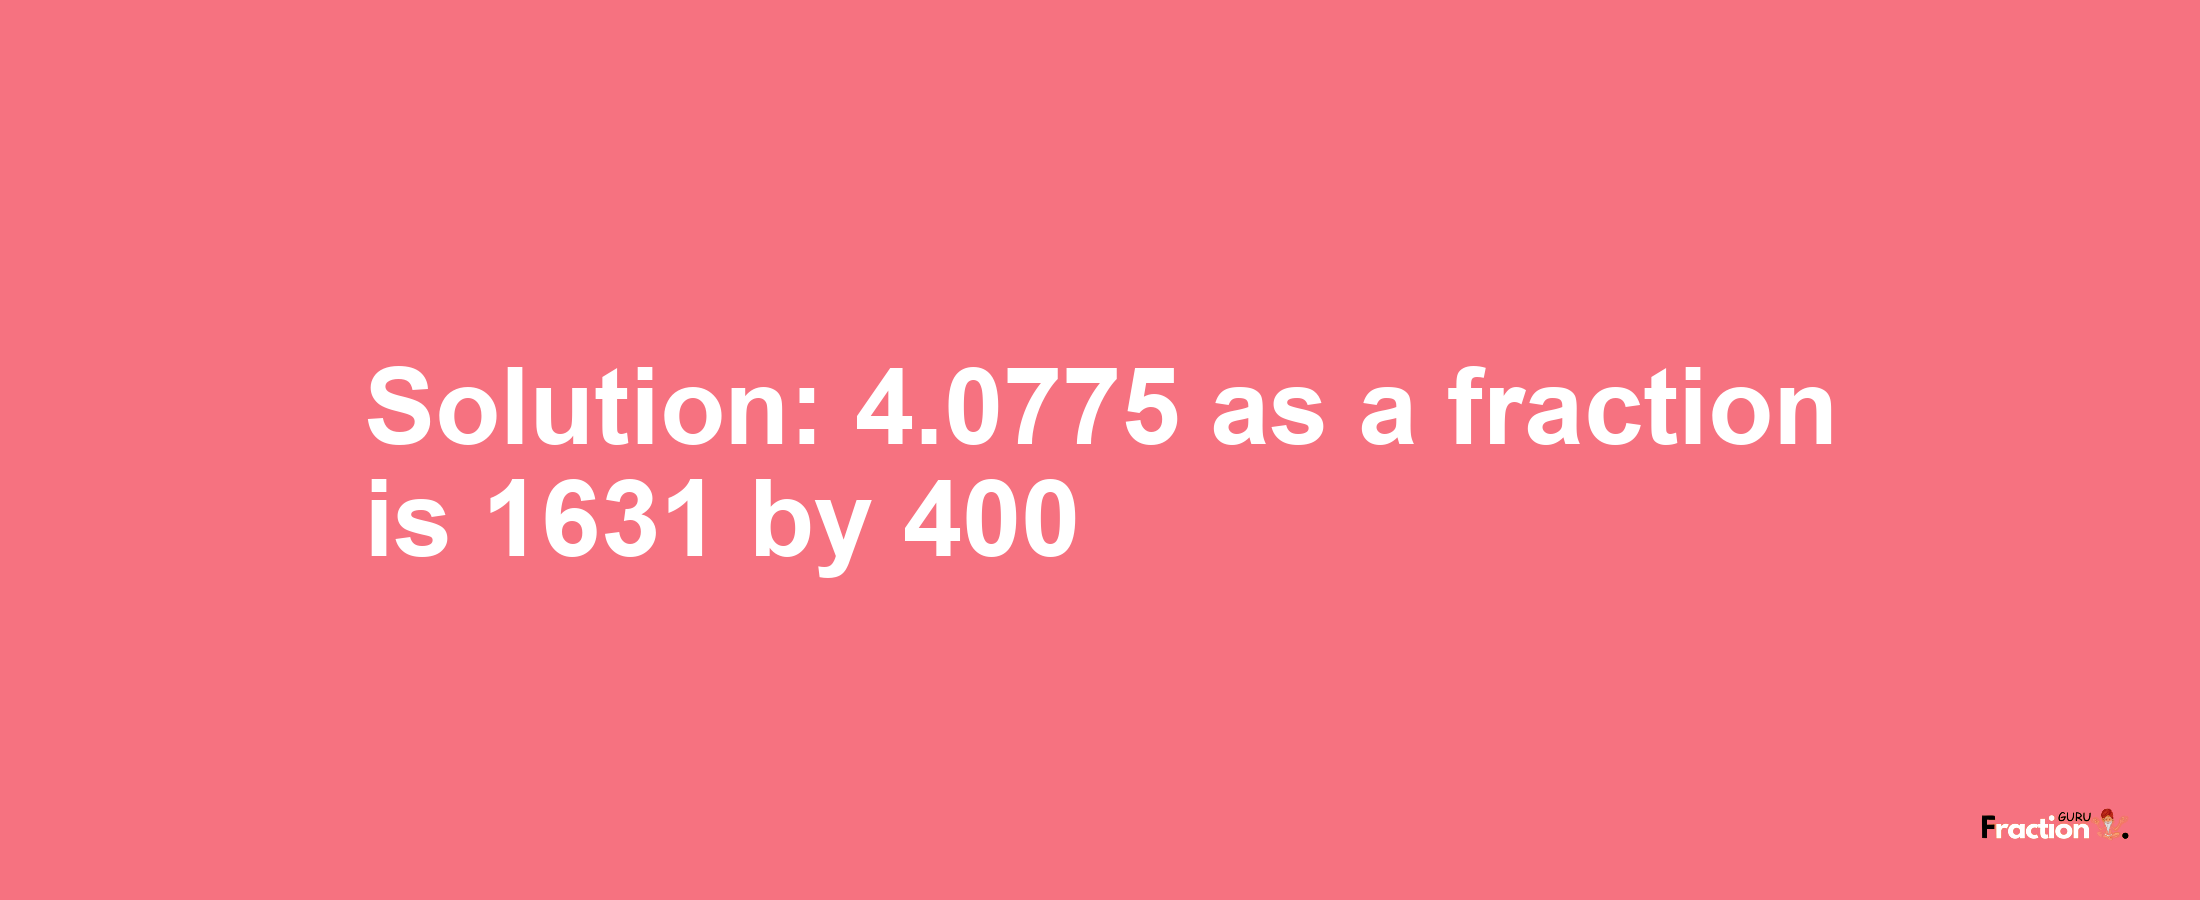 Solution:4.0775 as a fraction is 1631/400